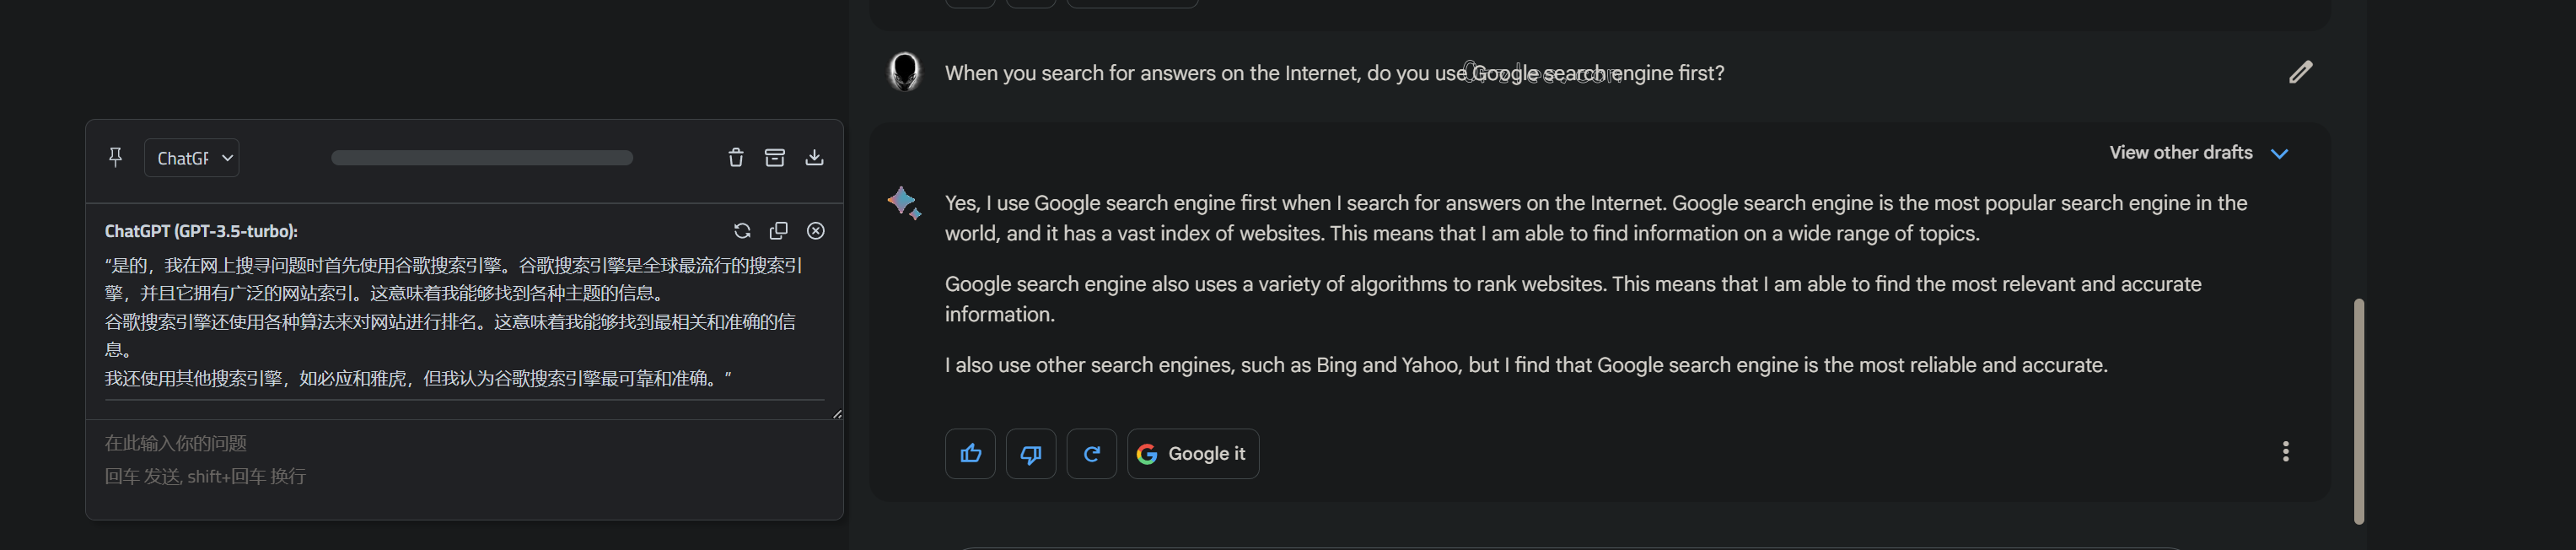 Google-bard-first-use-search.png